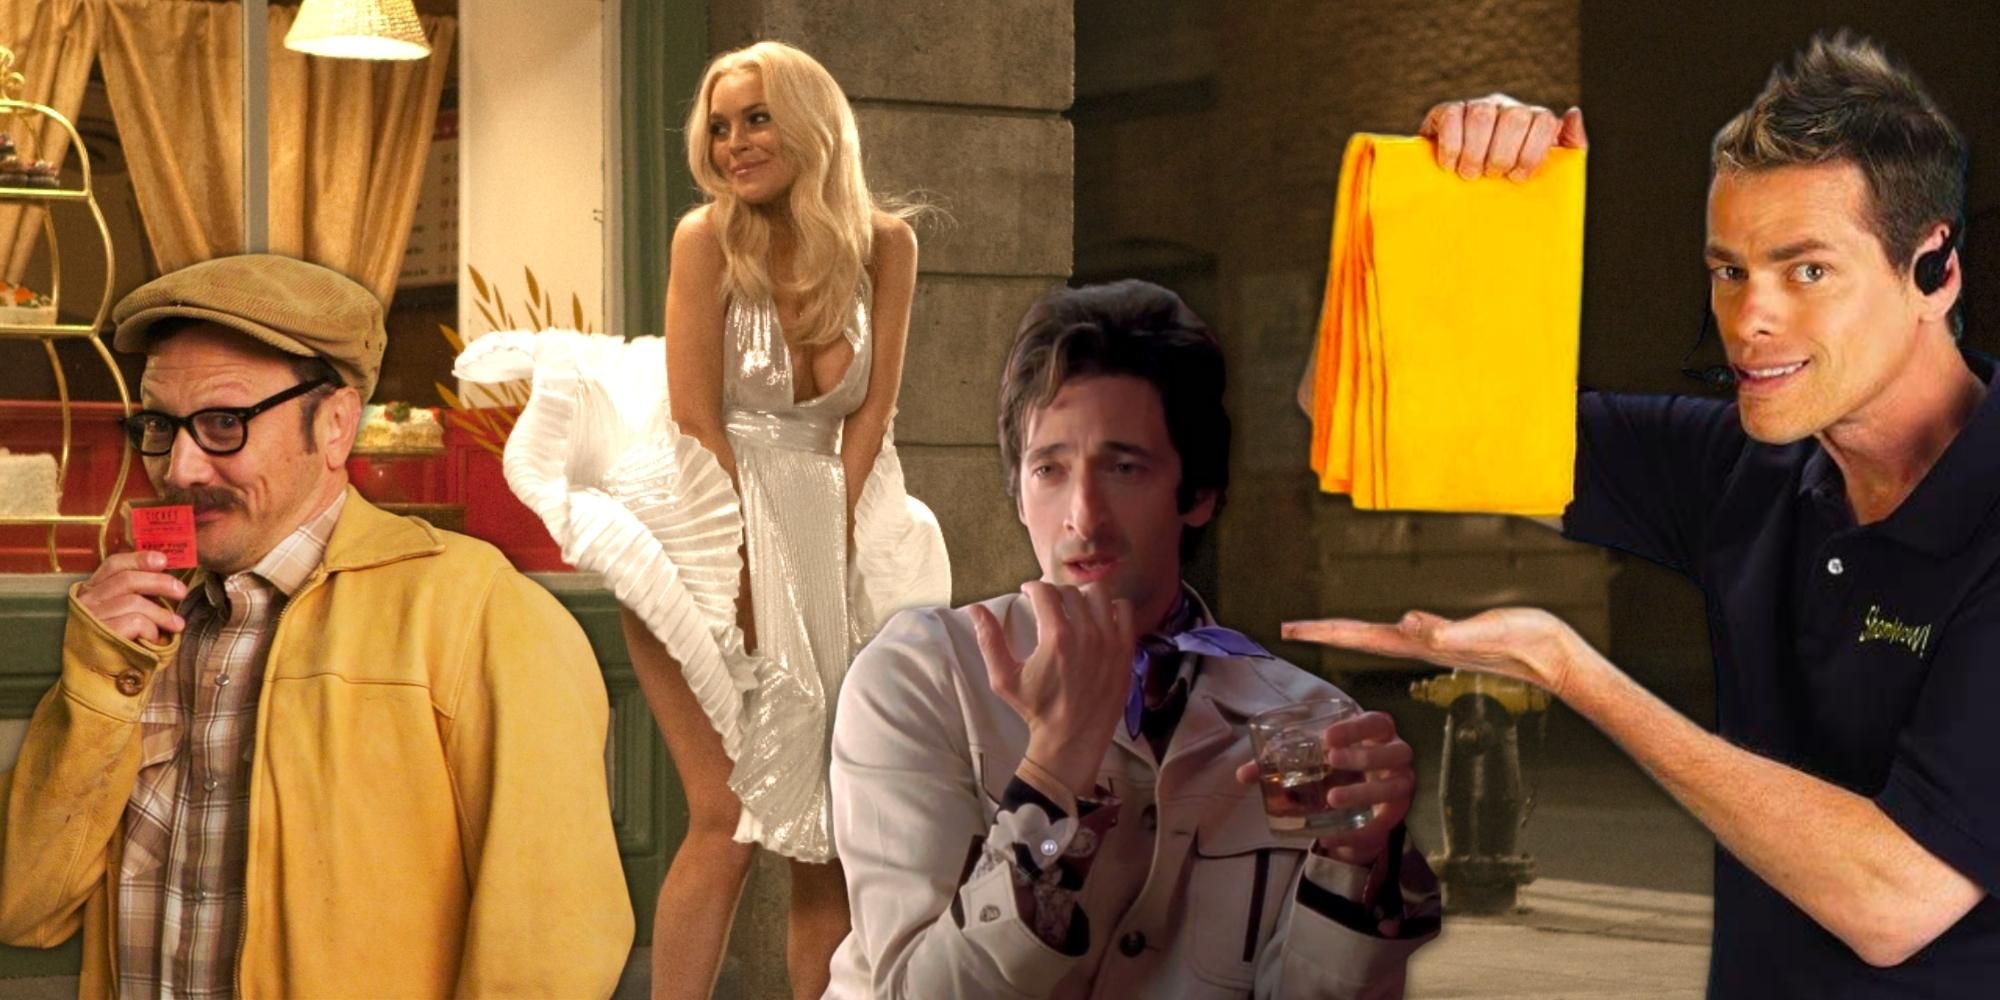 rob schneider, lindsay lohan, adrien brody as they appear in InAPPropriate Comedy directed by Vince Offer the Shamwow guy